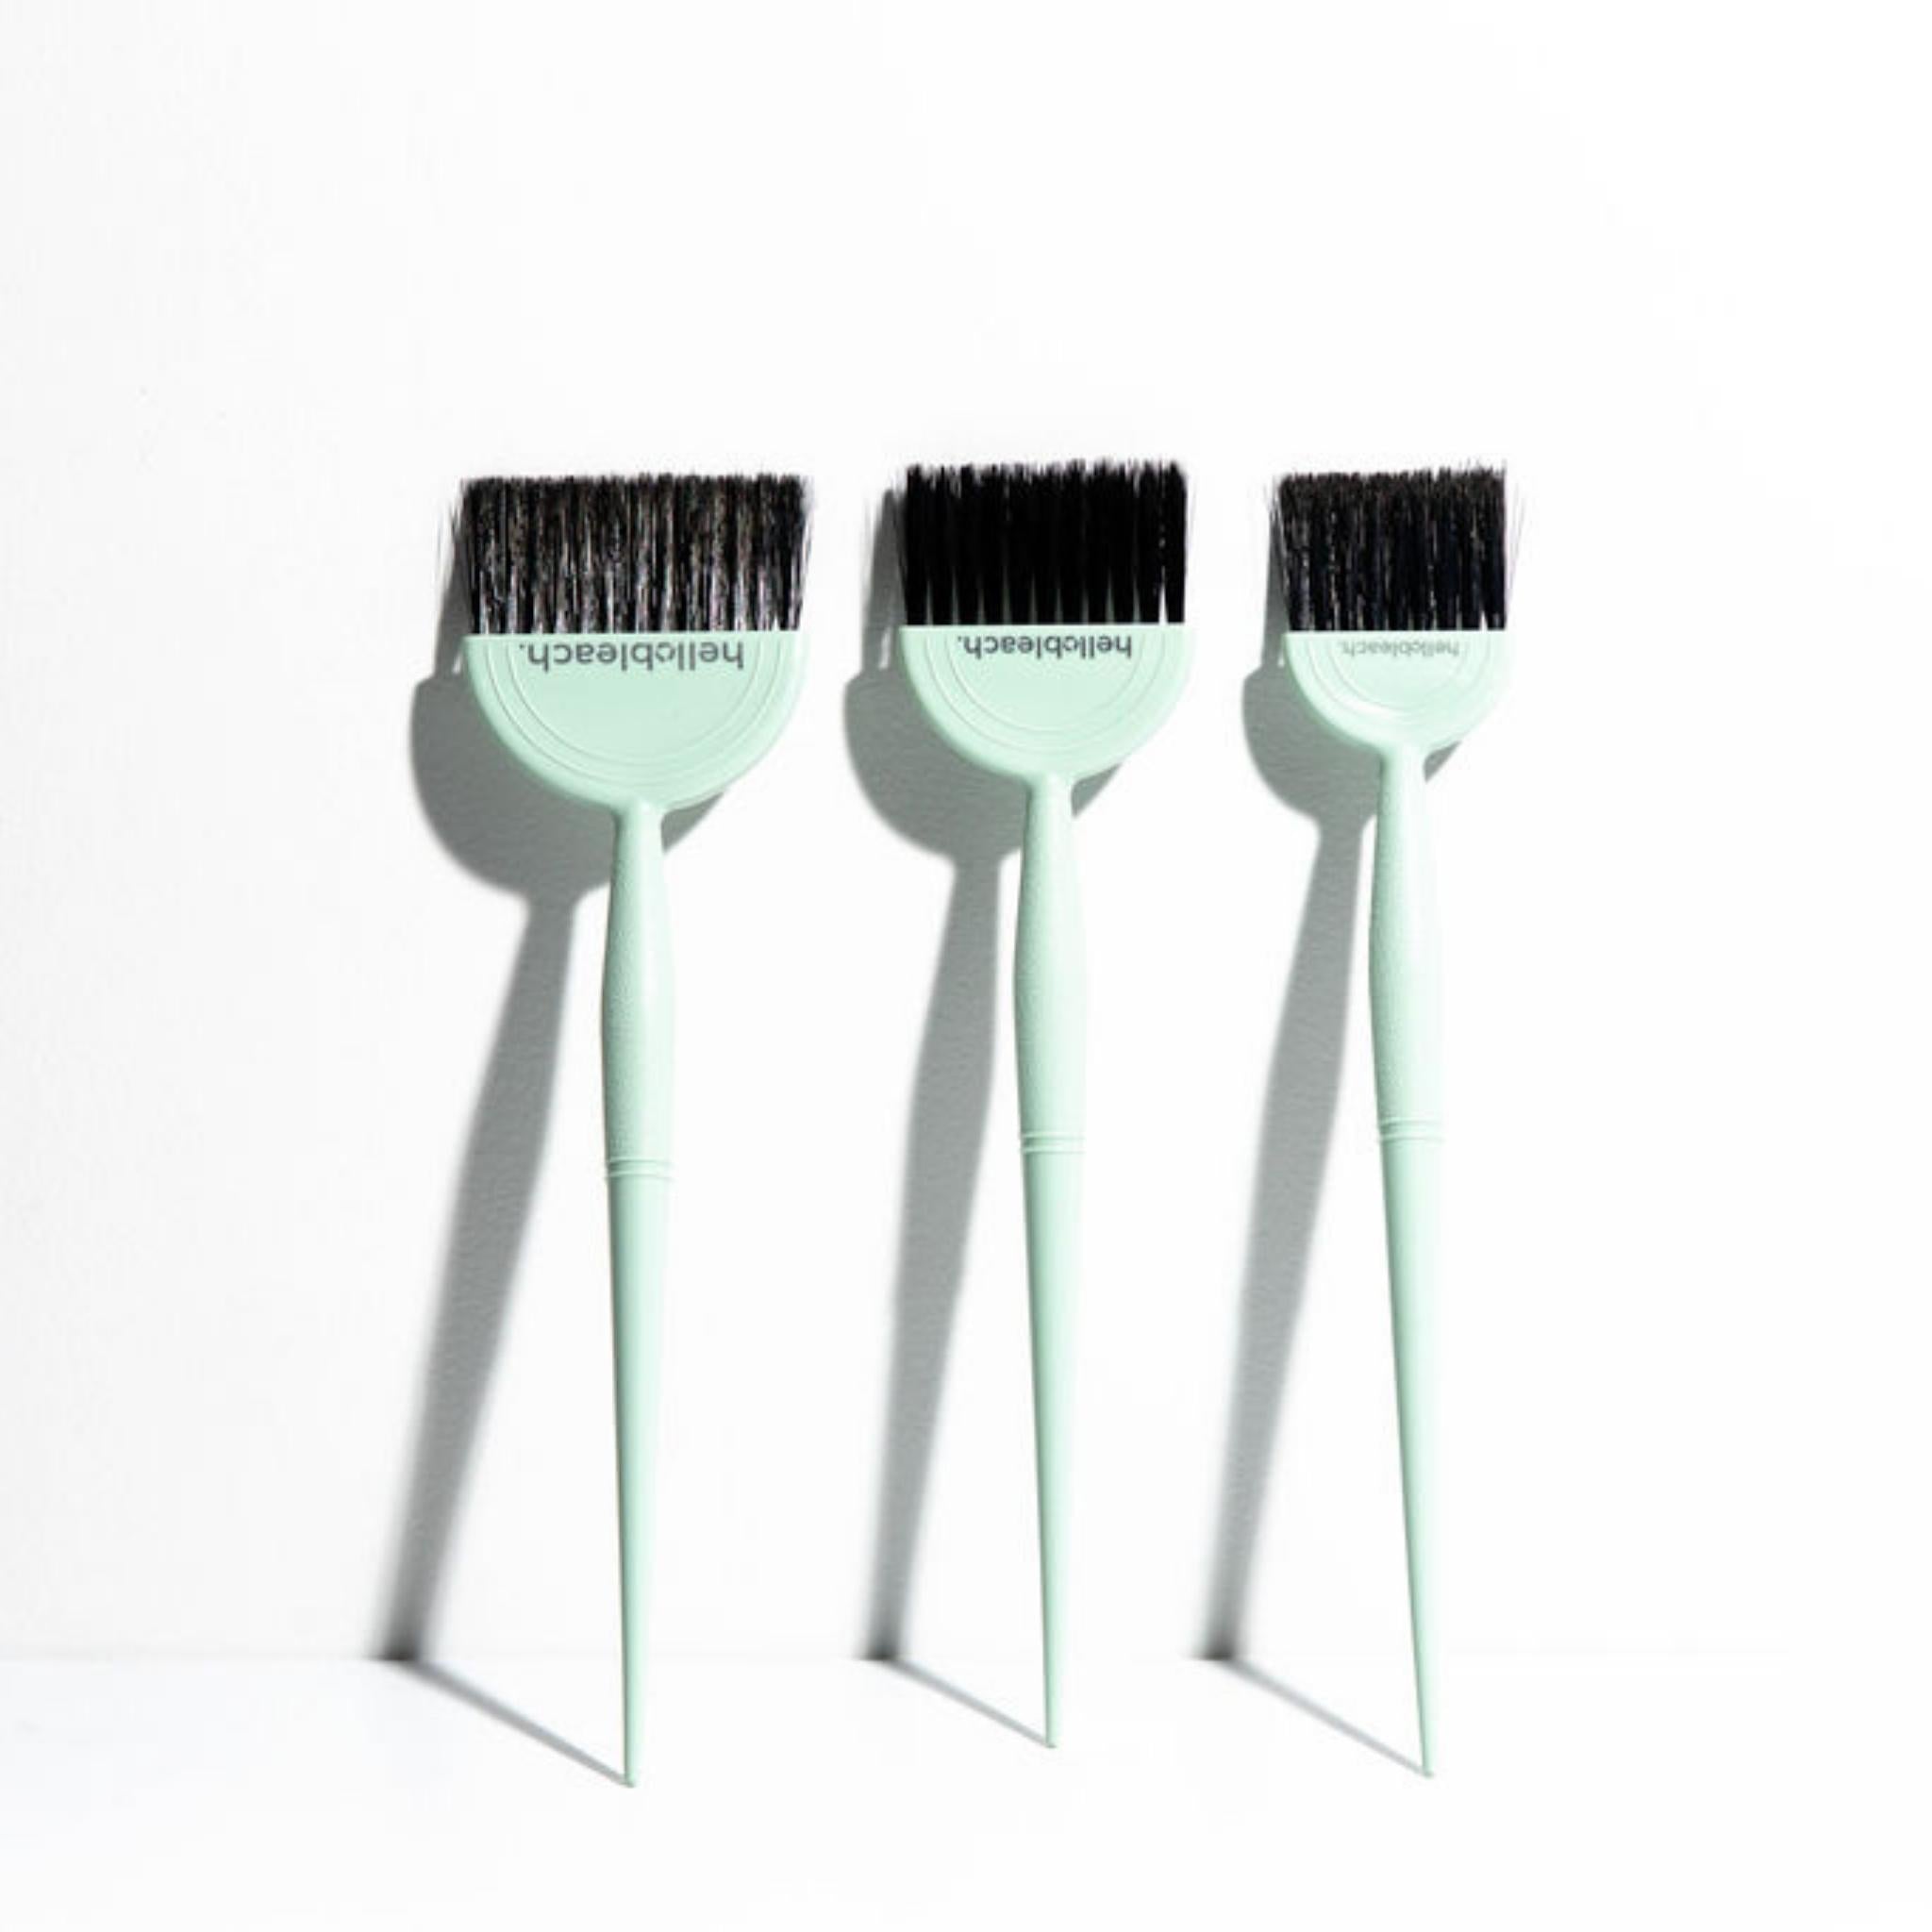 TINT BRUSHES MADE FROM RECYCLED PLASTICS